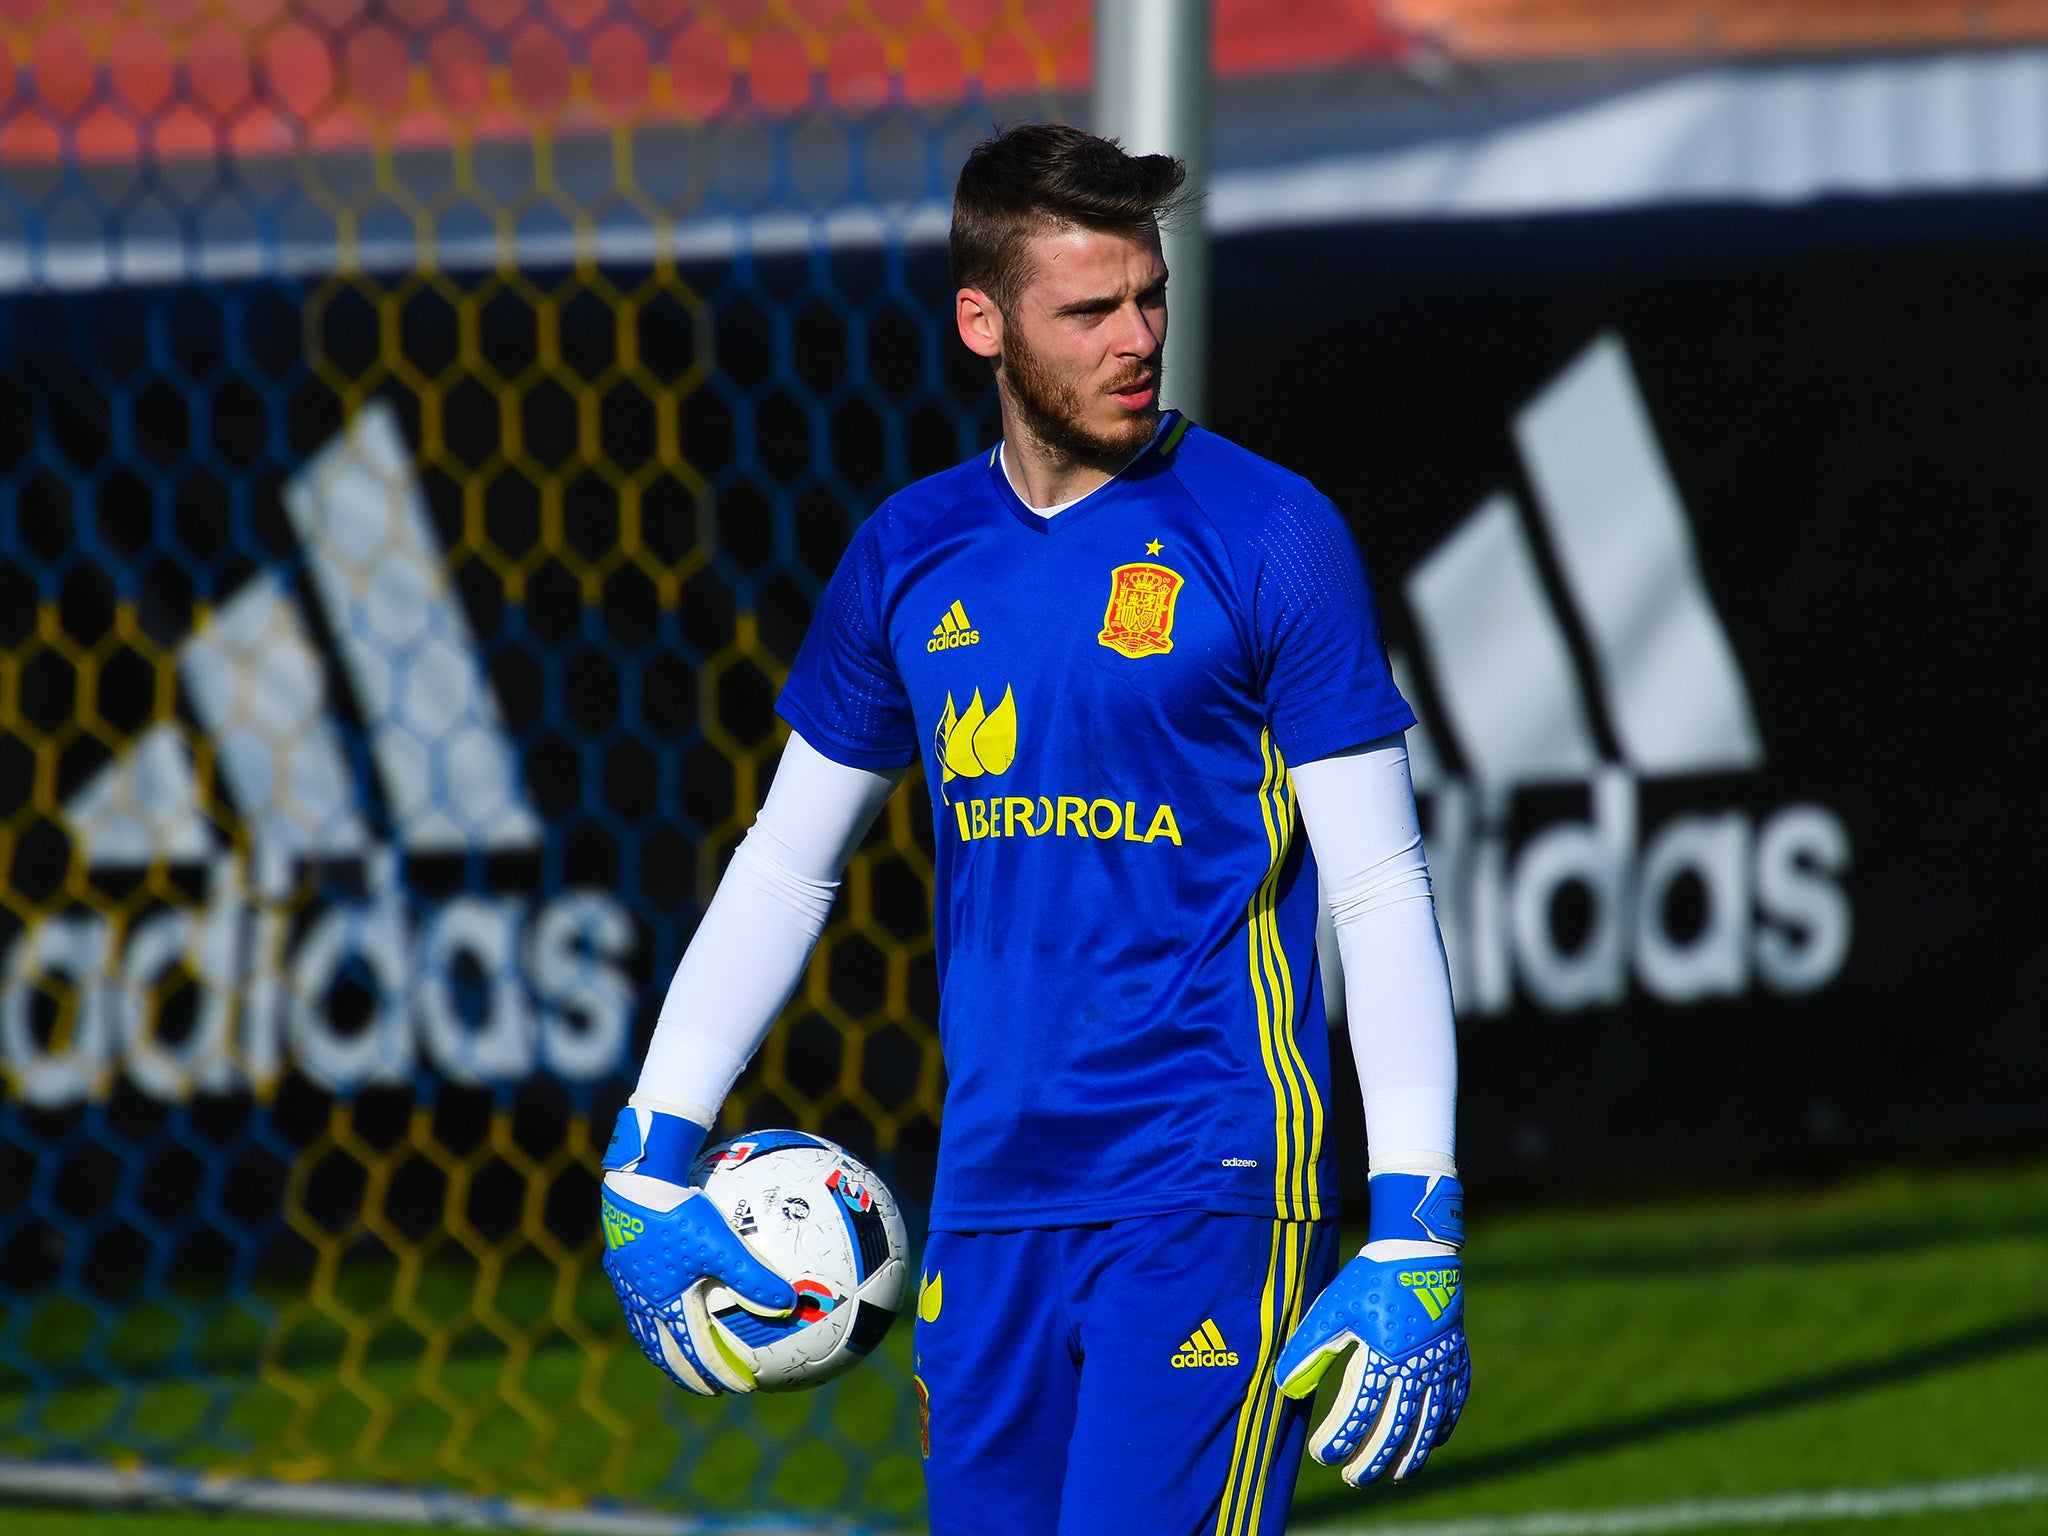 David De Gea is expected to stay at Manchester United despite interest from Real Madrid